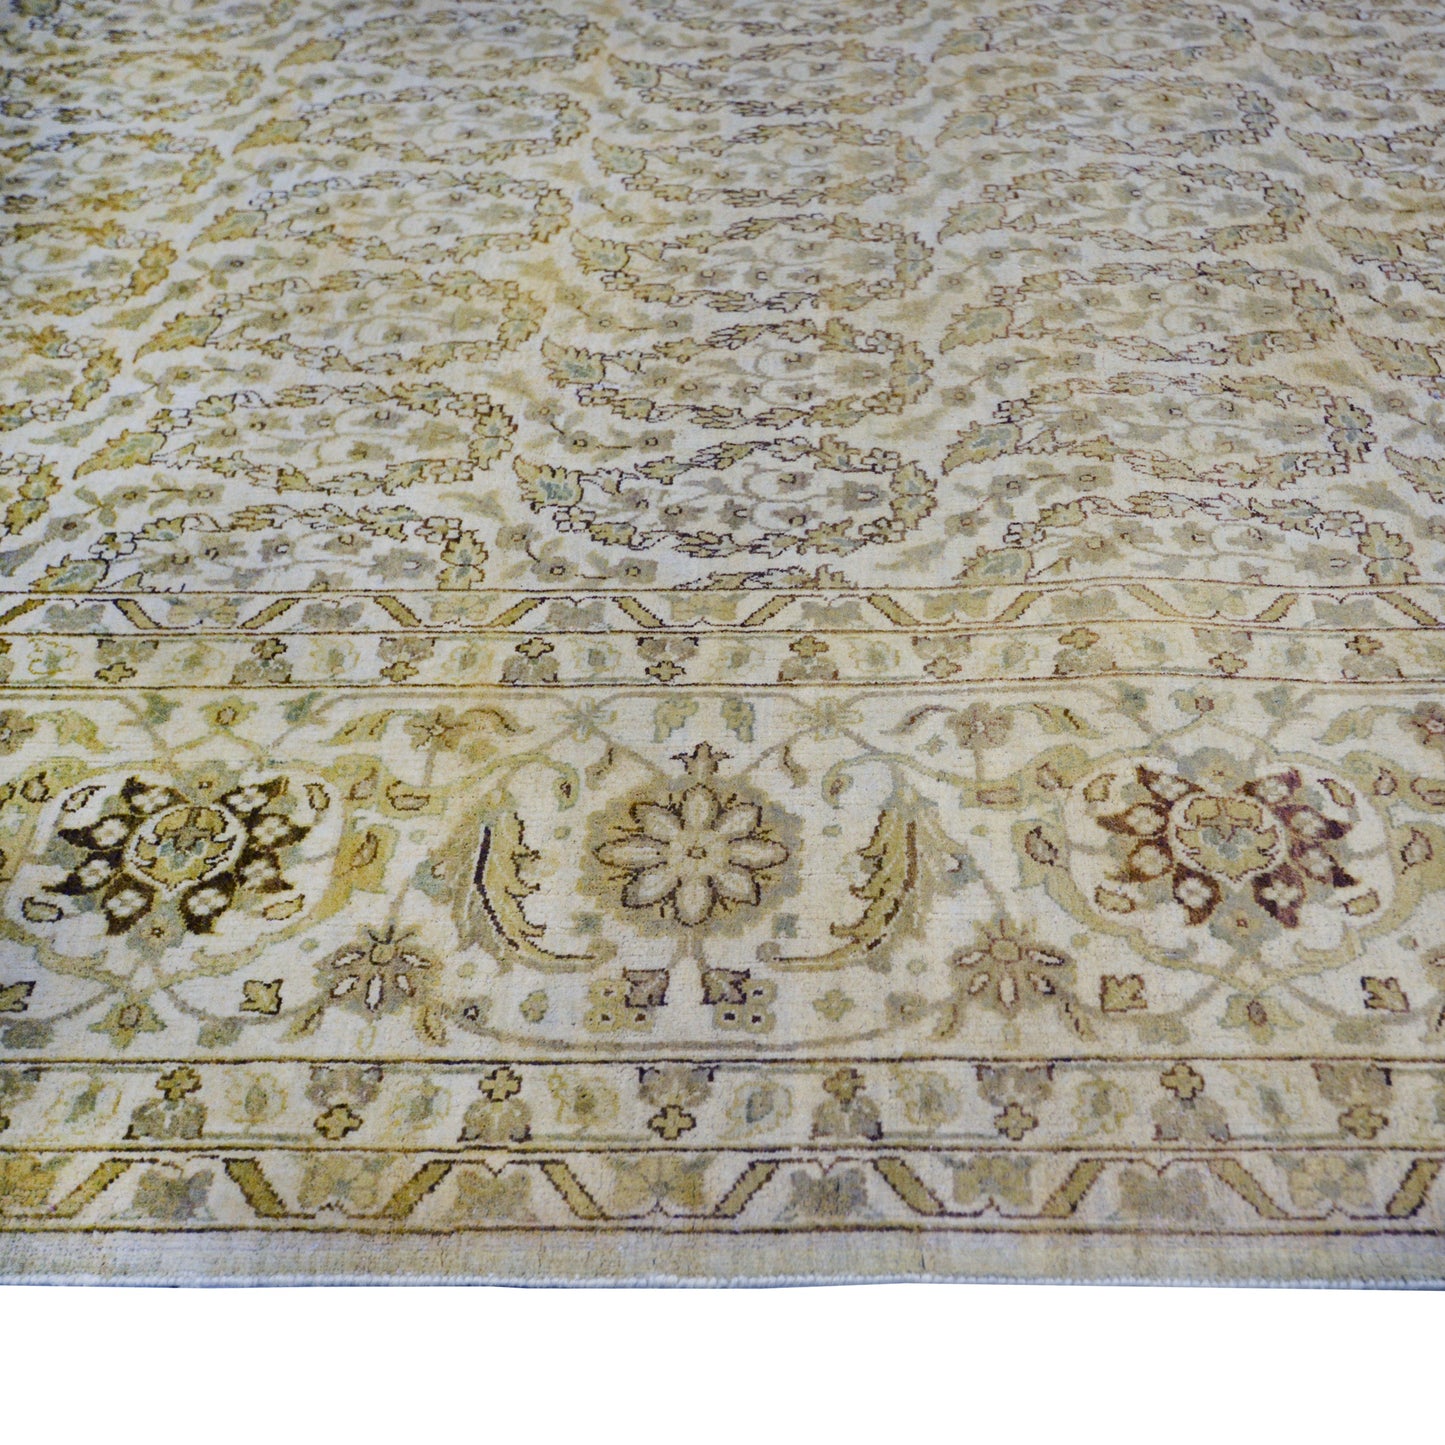 Get trendy with Lychee Ivory, Beige and Brown Traditional Mamluk Pure Wool Luxury Handknotted Area Rug - Traditional Rugs available at Jaipur Oriental Rugs. Grab yours for $3499.00 today!